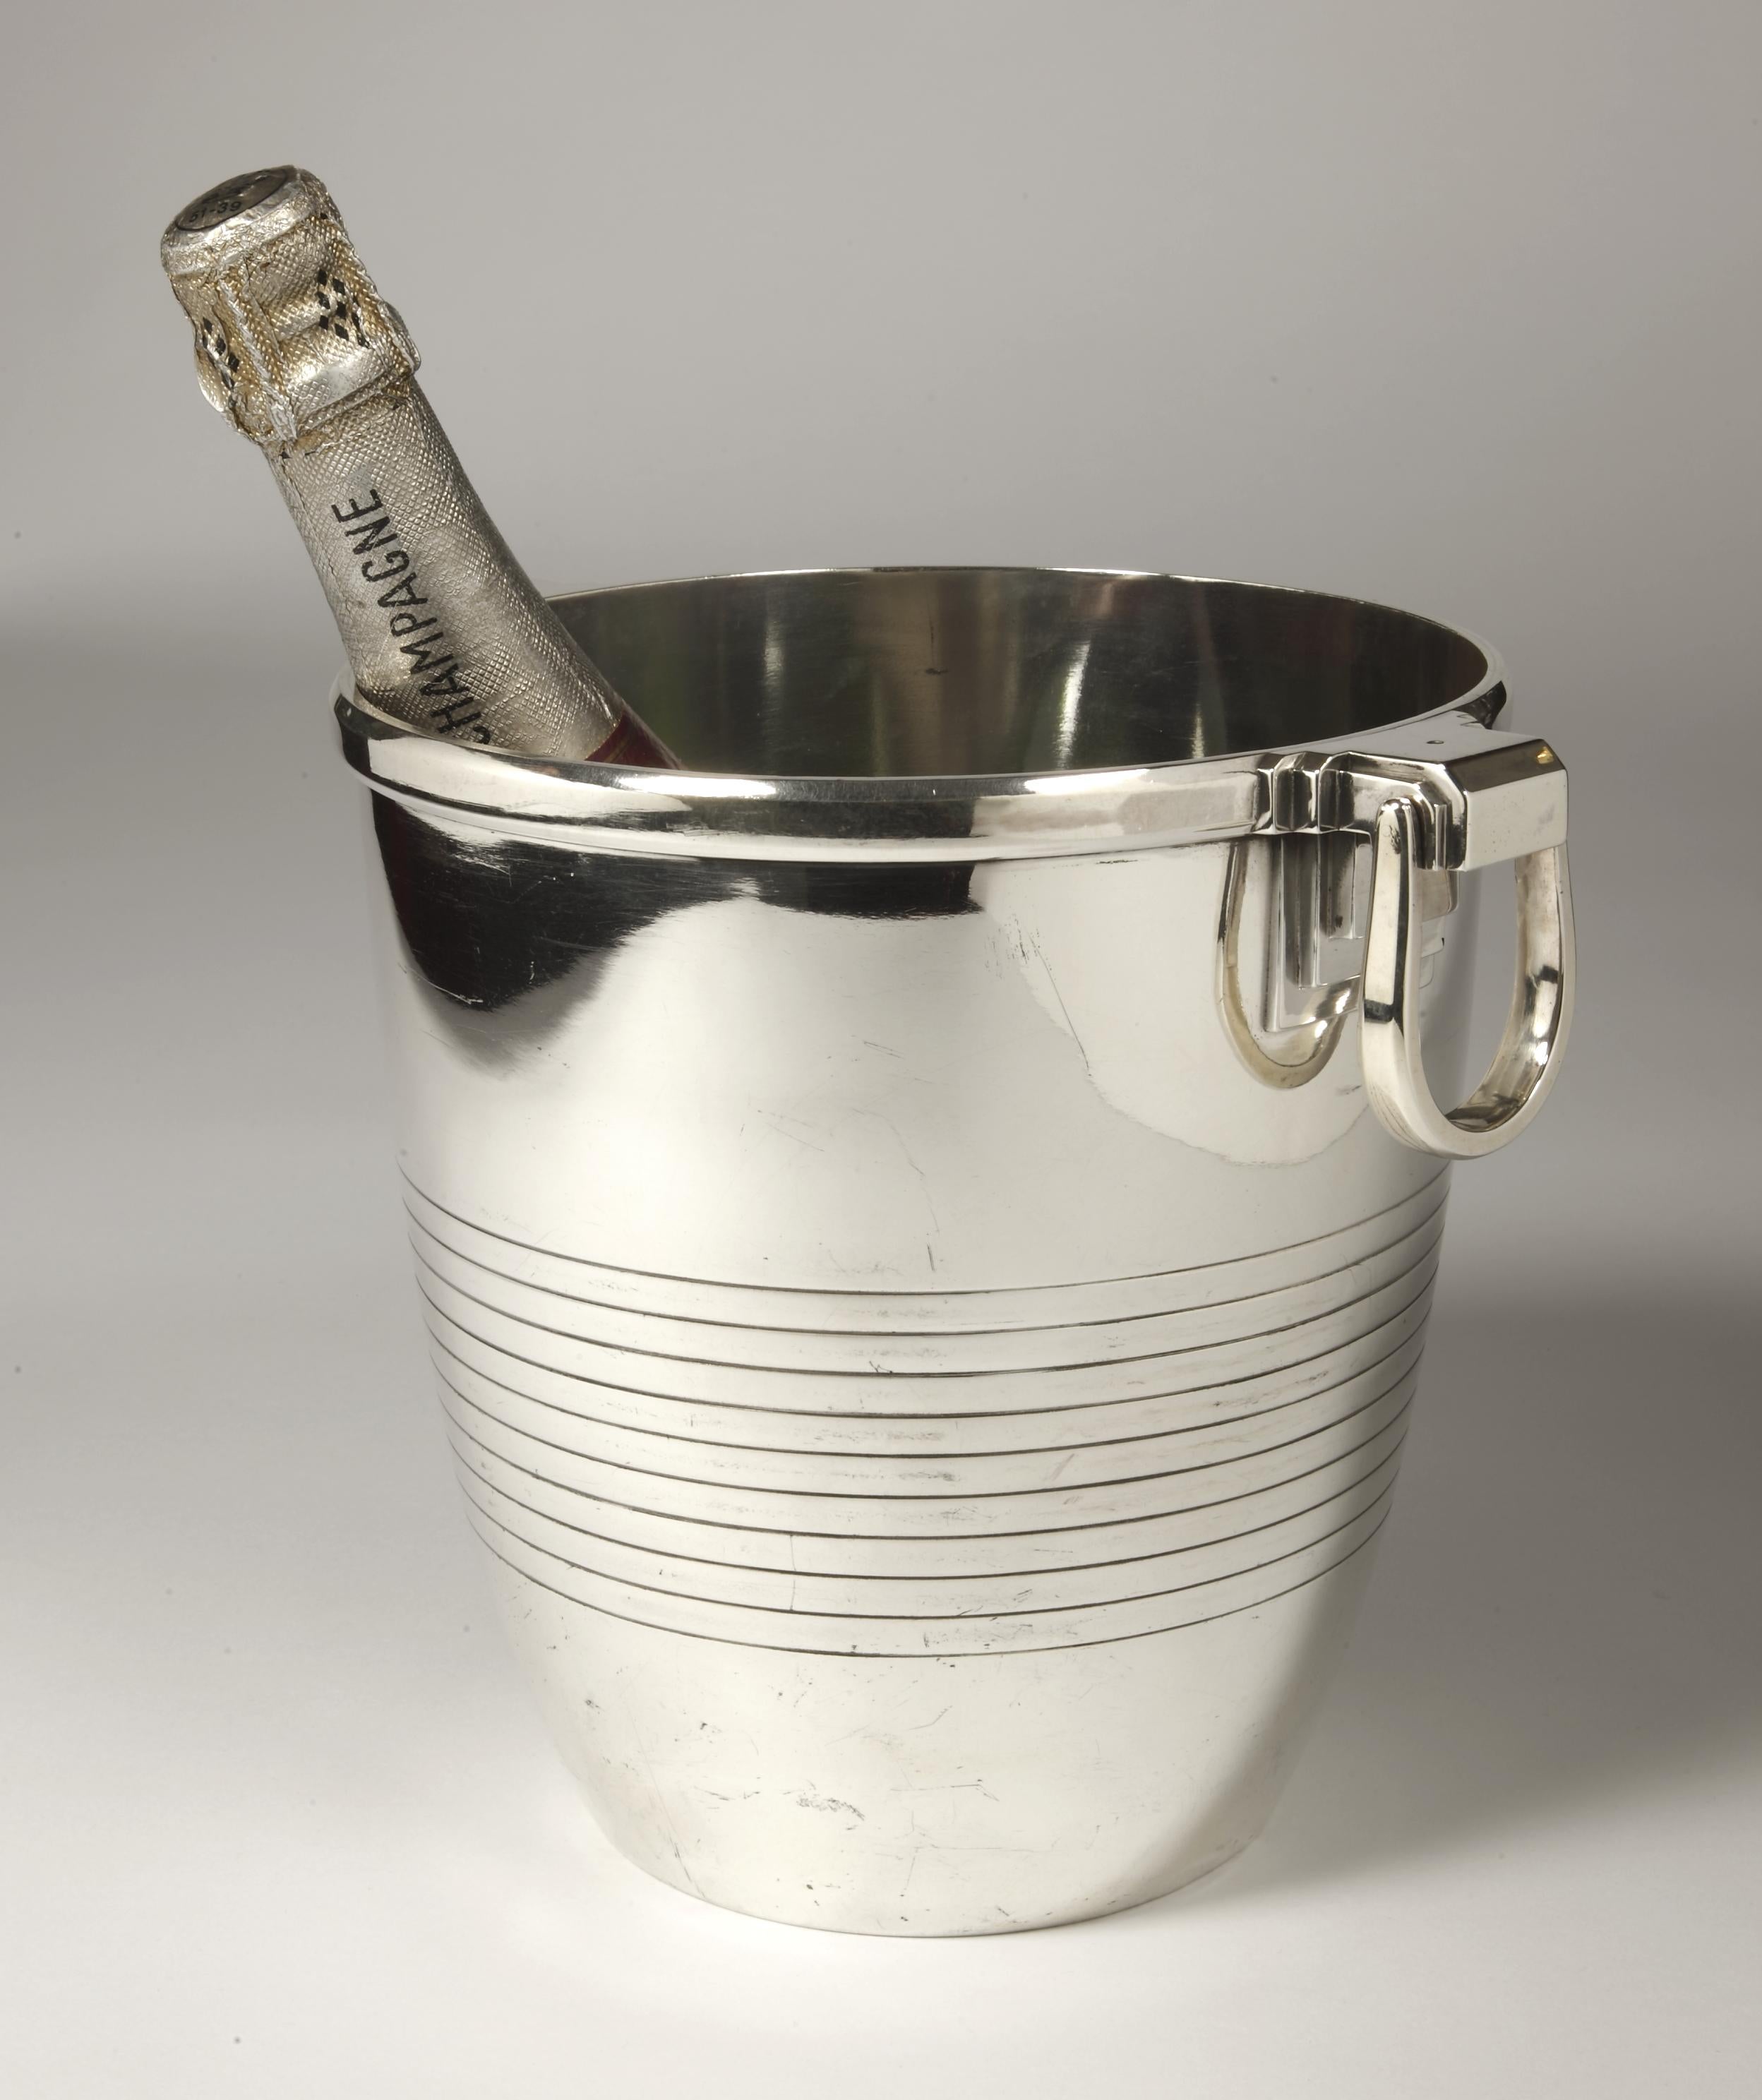 Solid silver wine cooler, Minerva hallmark circa 1930, ovoid shape with flat bottom, plain body and ribbed halfway up. On each side and applies two removable handles.

silverware -

Dimensions: Height 21,5 cm, Diameter: 21 cm

Weight: 1845